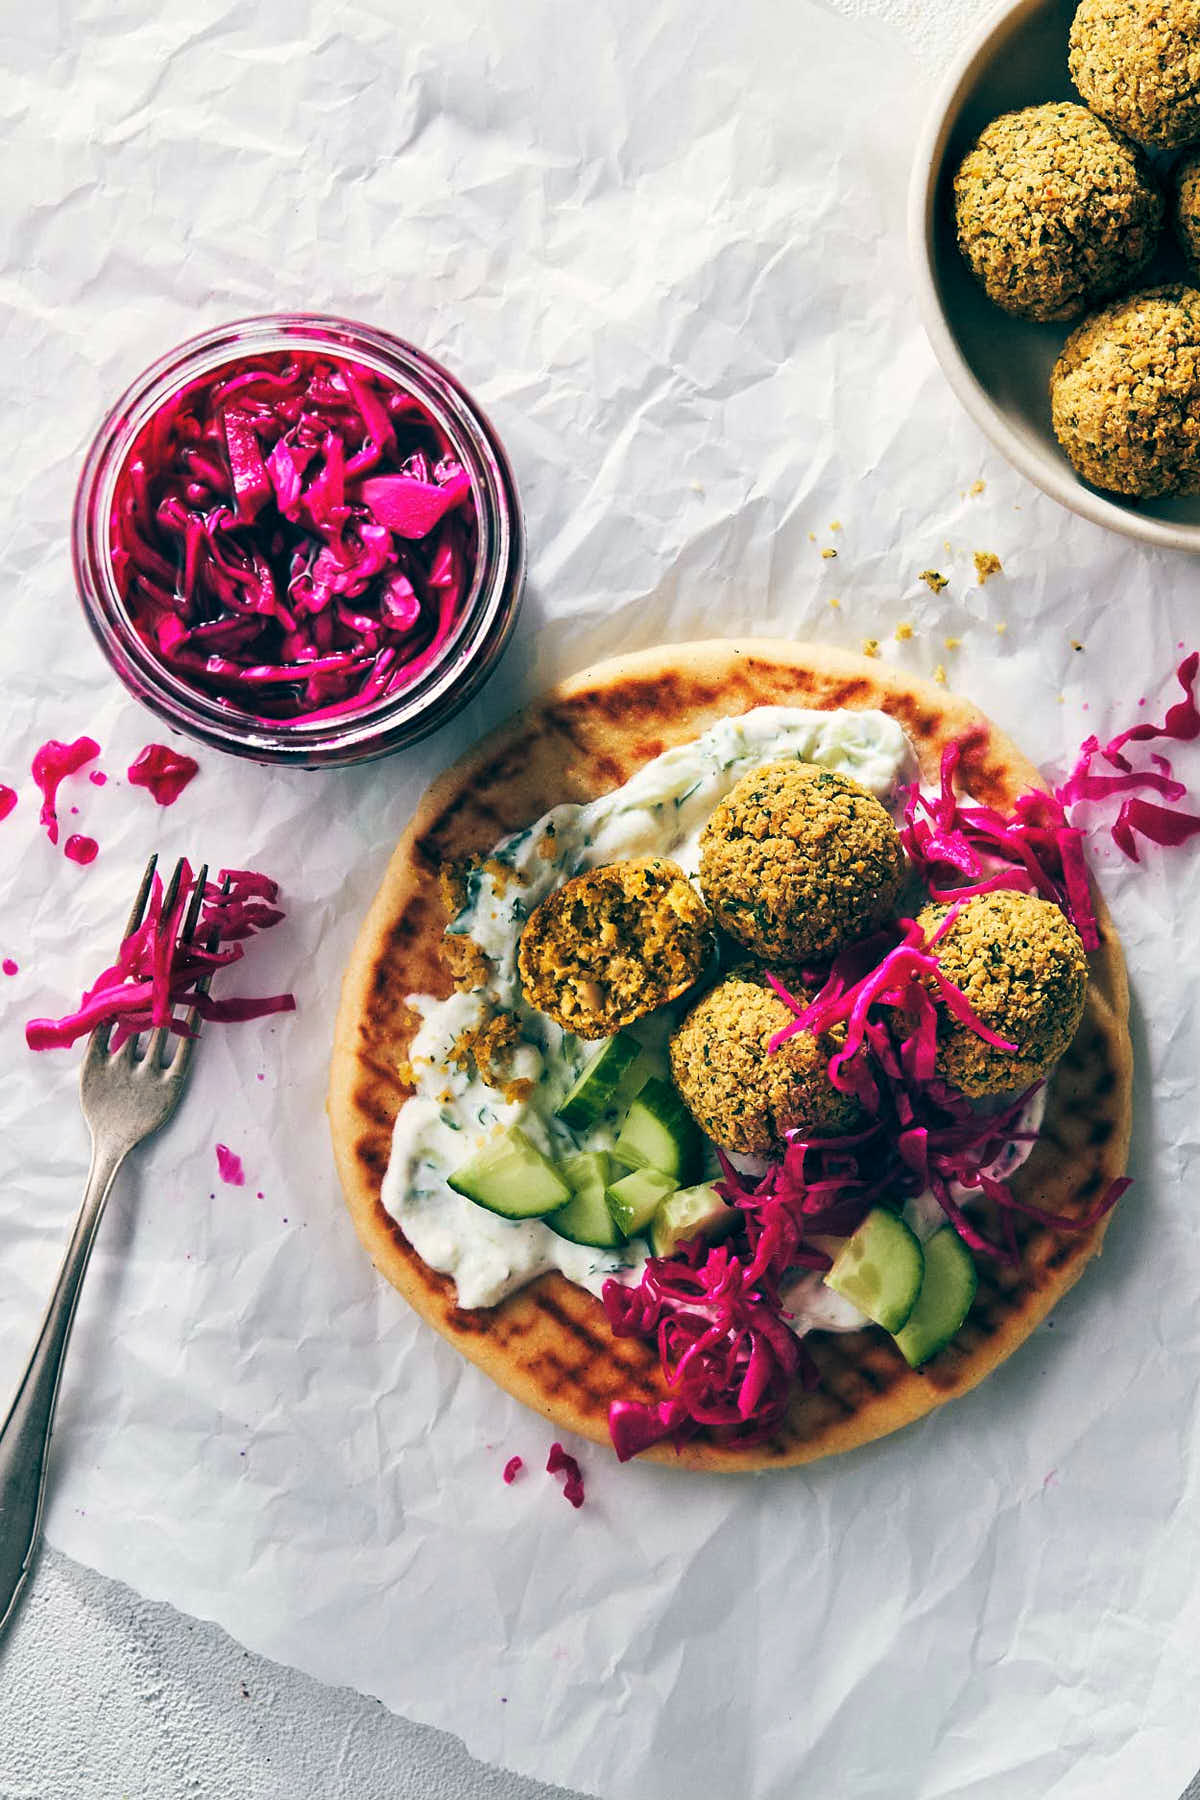 Oven baked falafel on a pita with tzatziki and pickled red onions